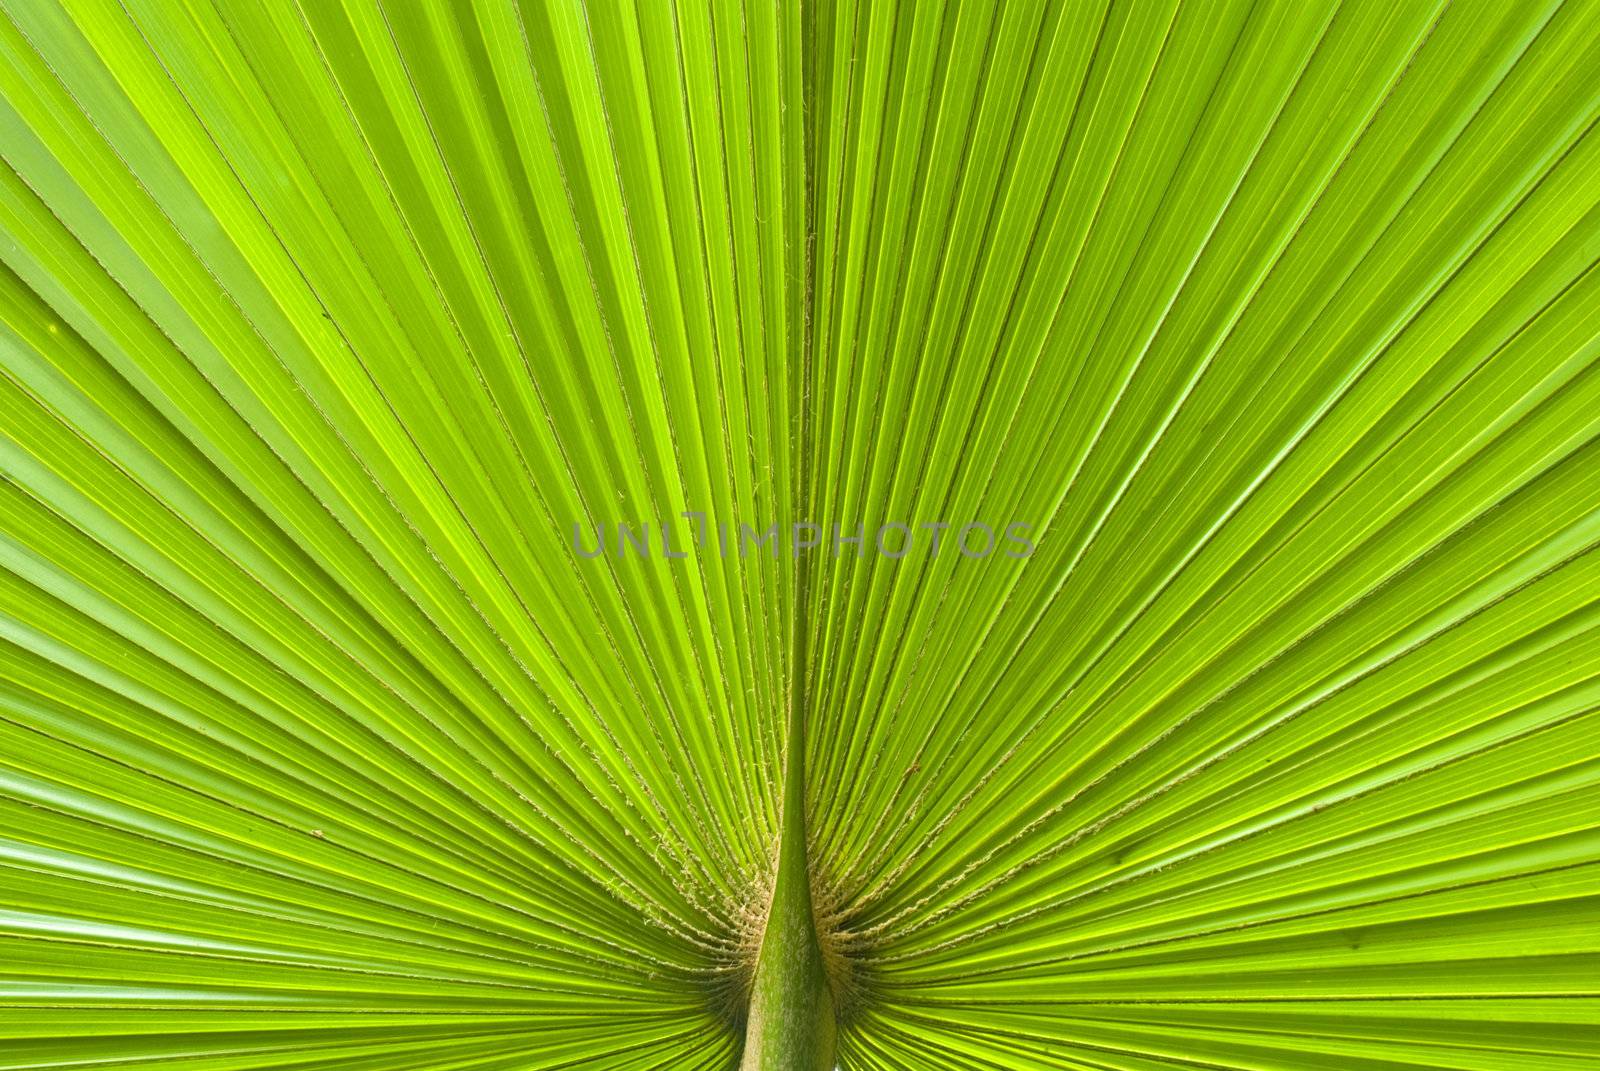 Chusan Palm Leaf section by yuliang11